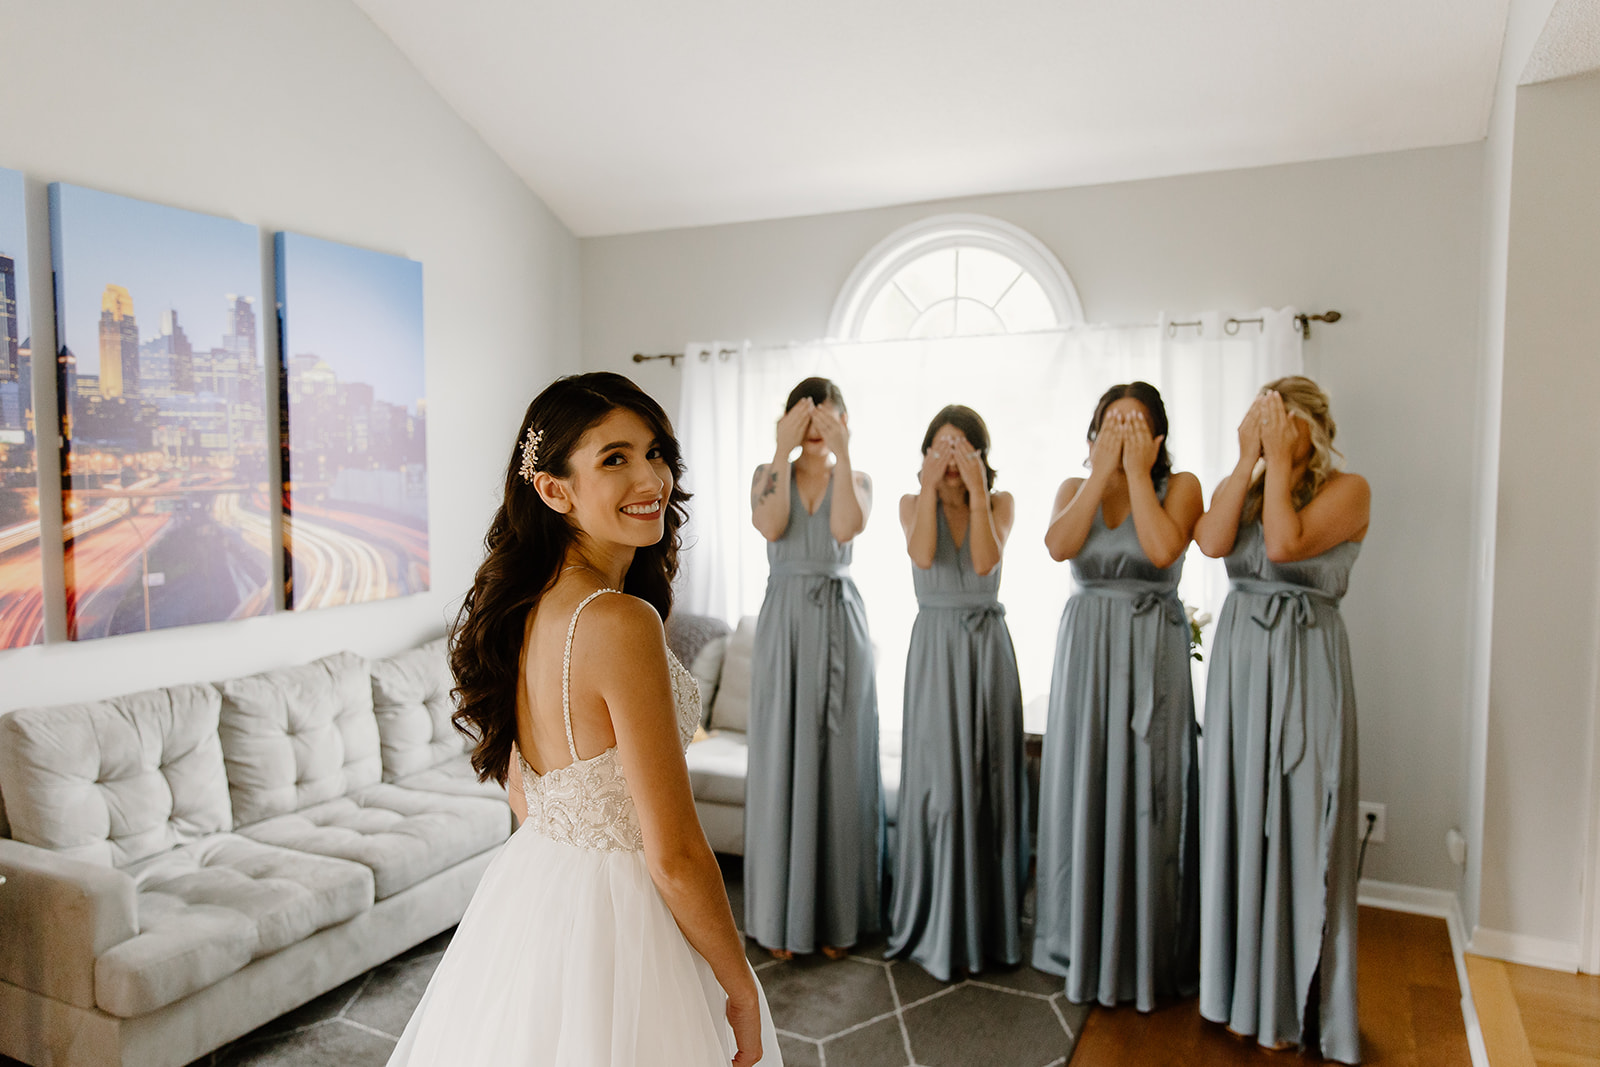 Bride looks over her shoulder while standing in front of her bridesmaids